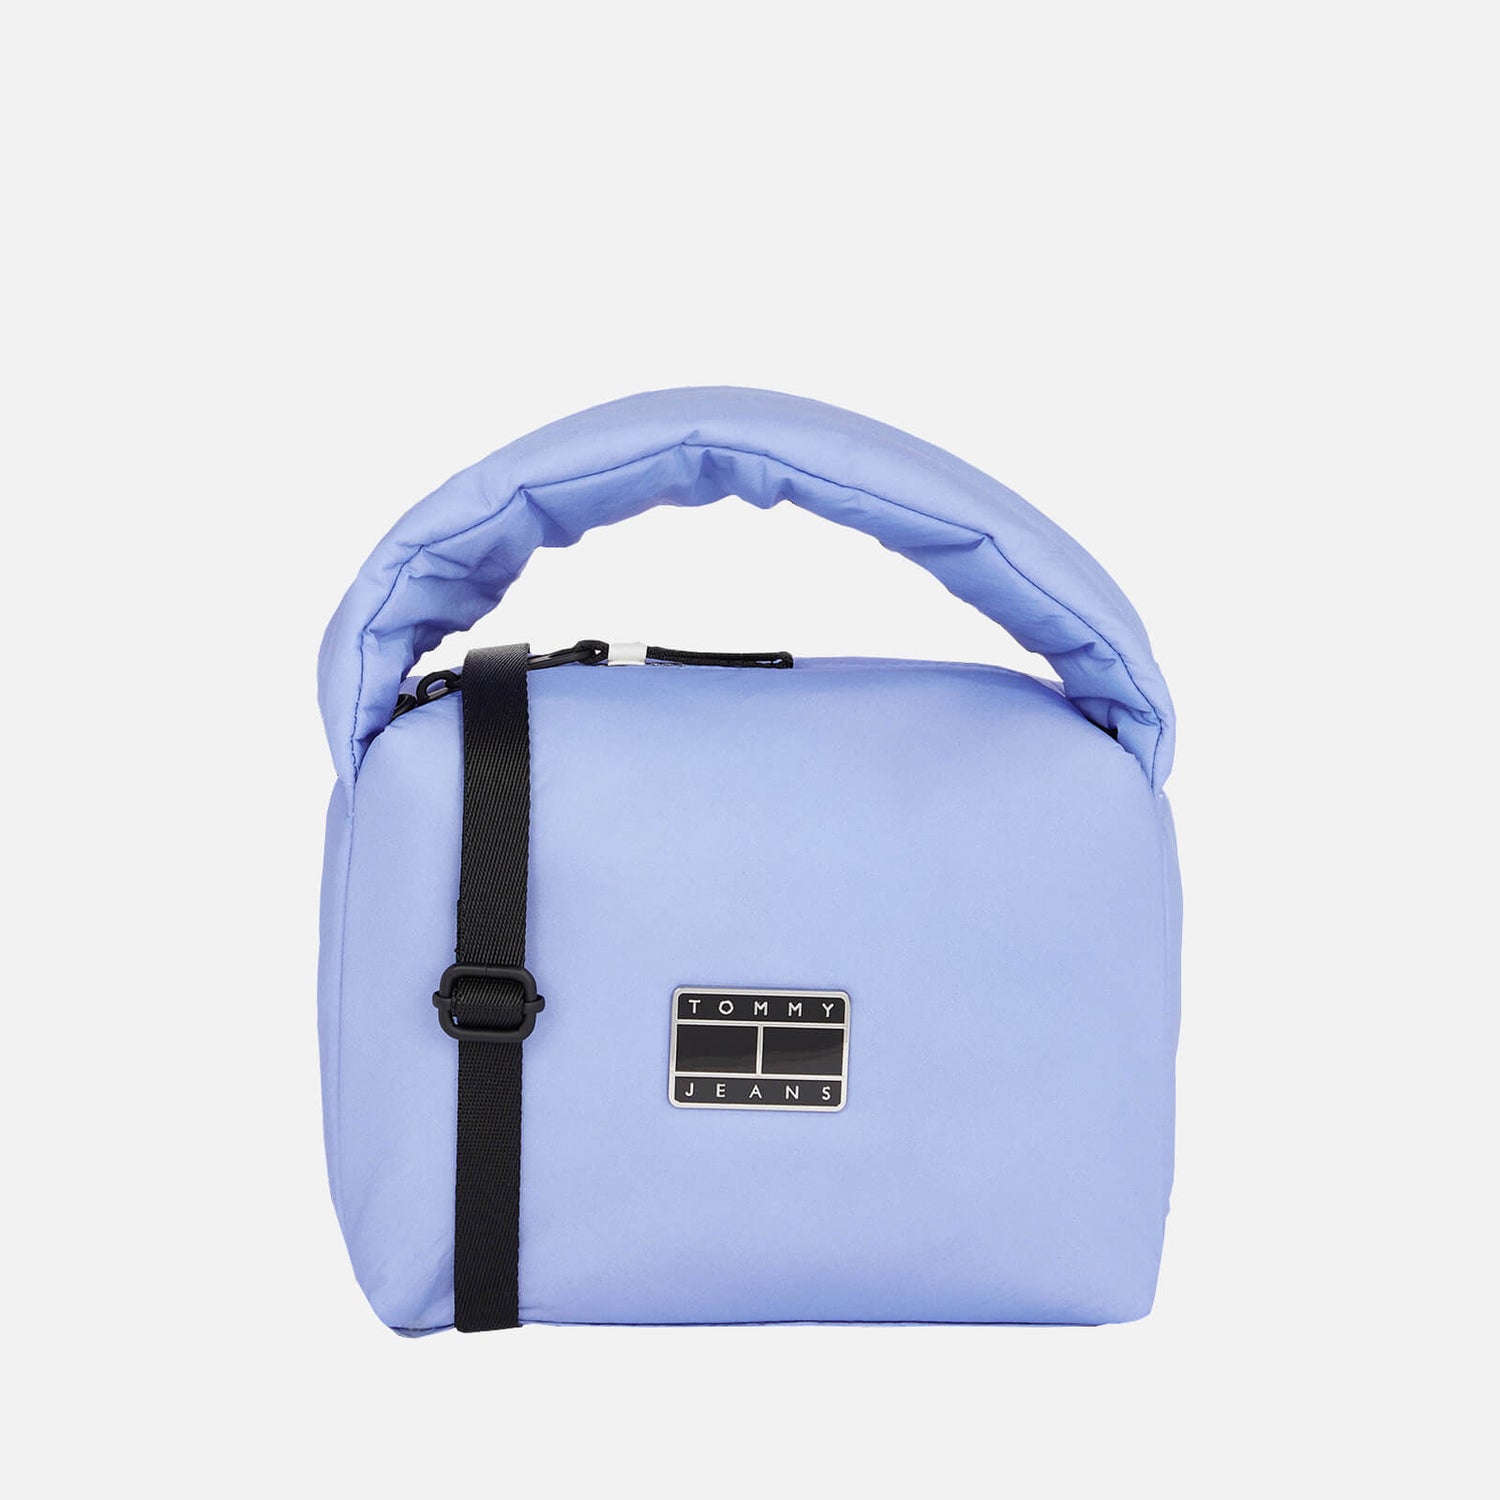 Tommy Jeans Women's Hype Conscious Crossover Bag - June Iris